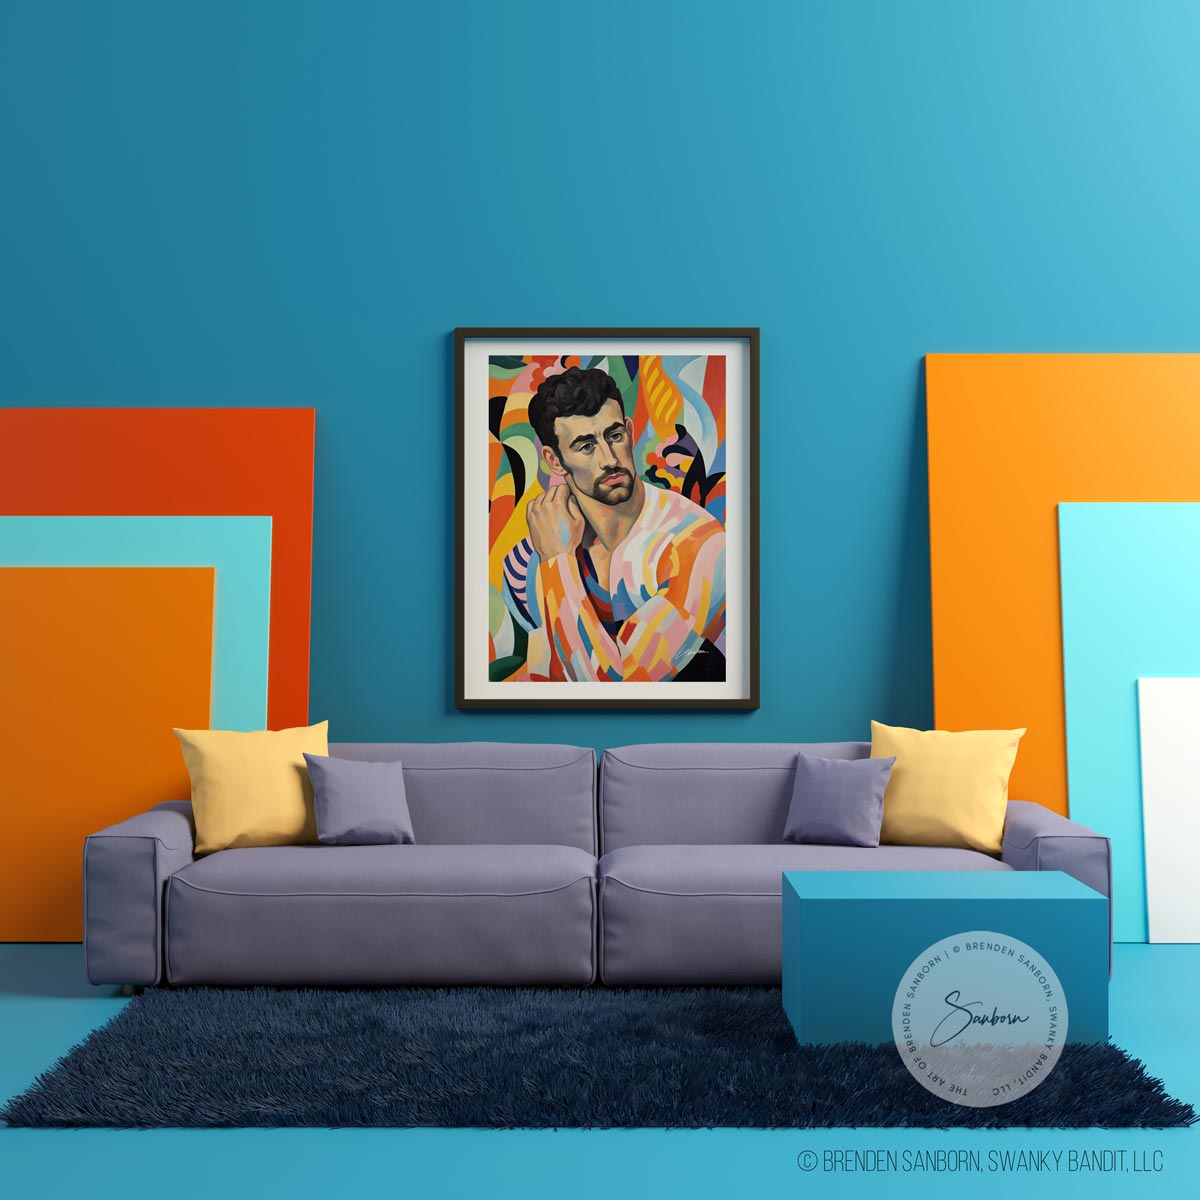 Thoughtful Male Form with Vibrant Abstract Patterns - Giclee Art Print